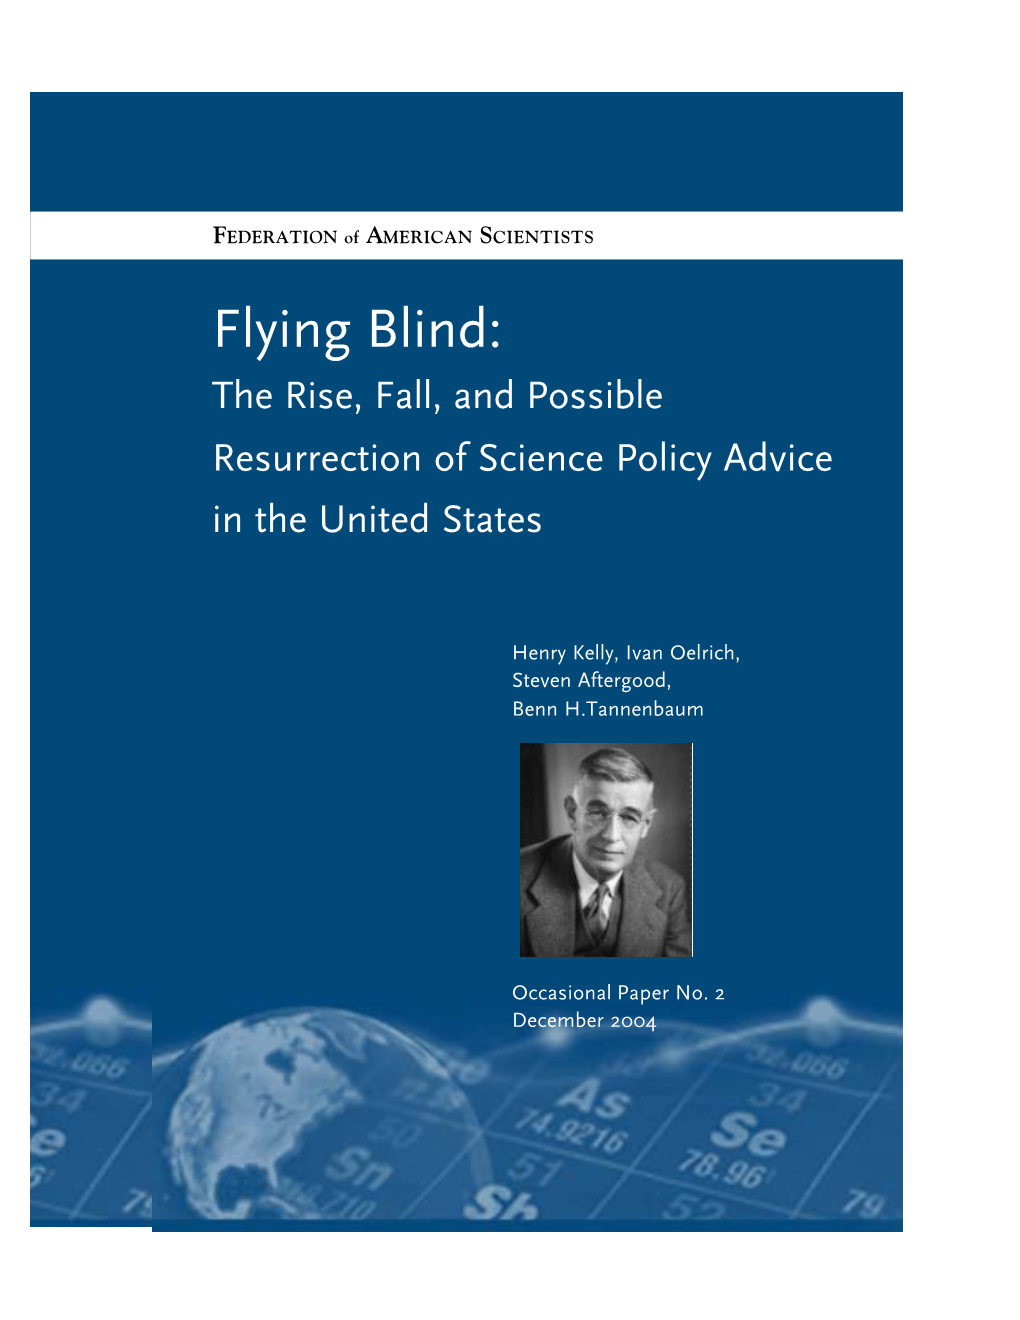 Flying Blind: the Rise, Fall, and Possible Resurrection of Science Policy Advice in the United States